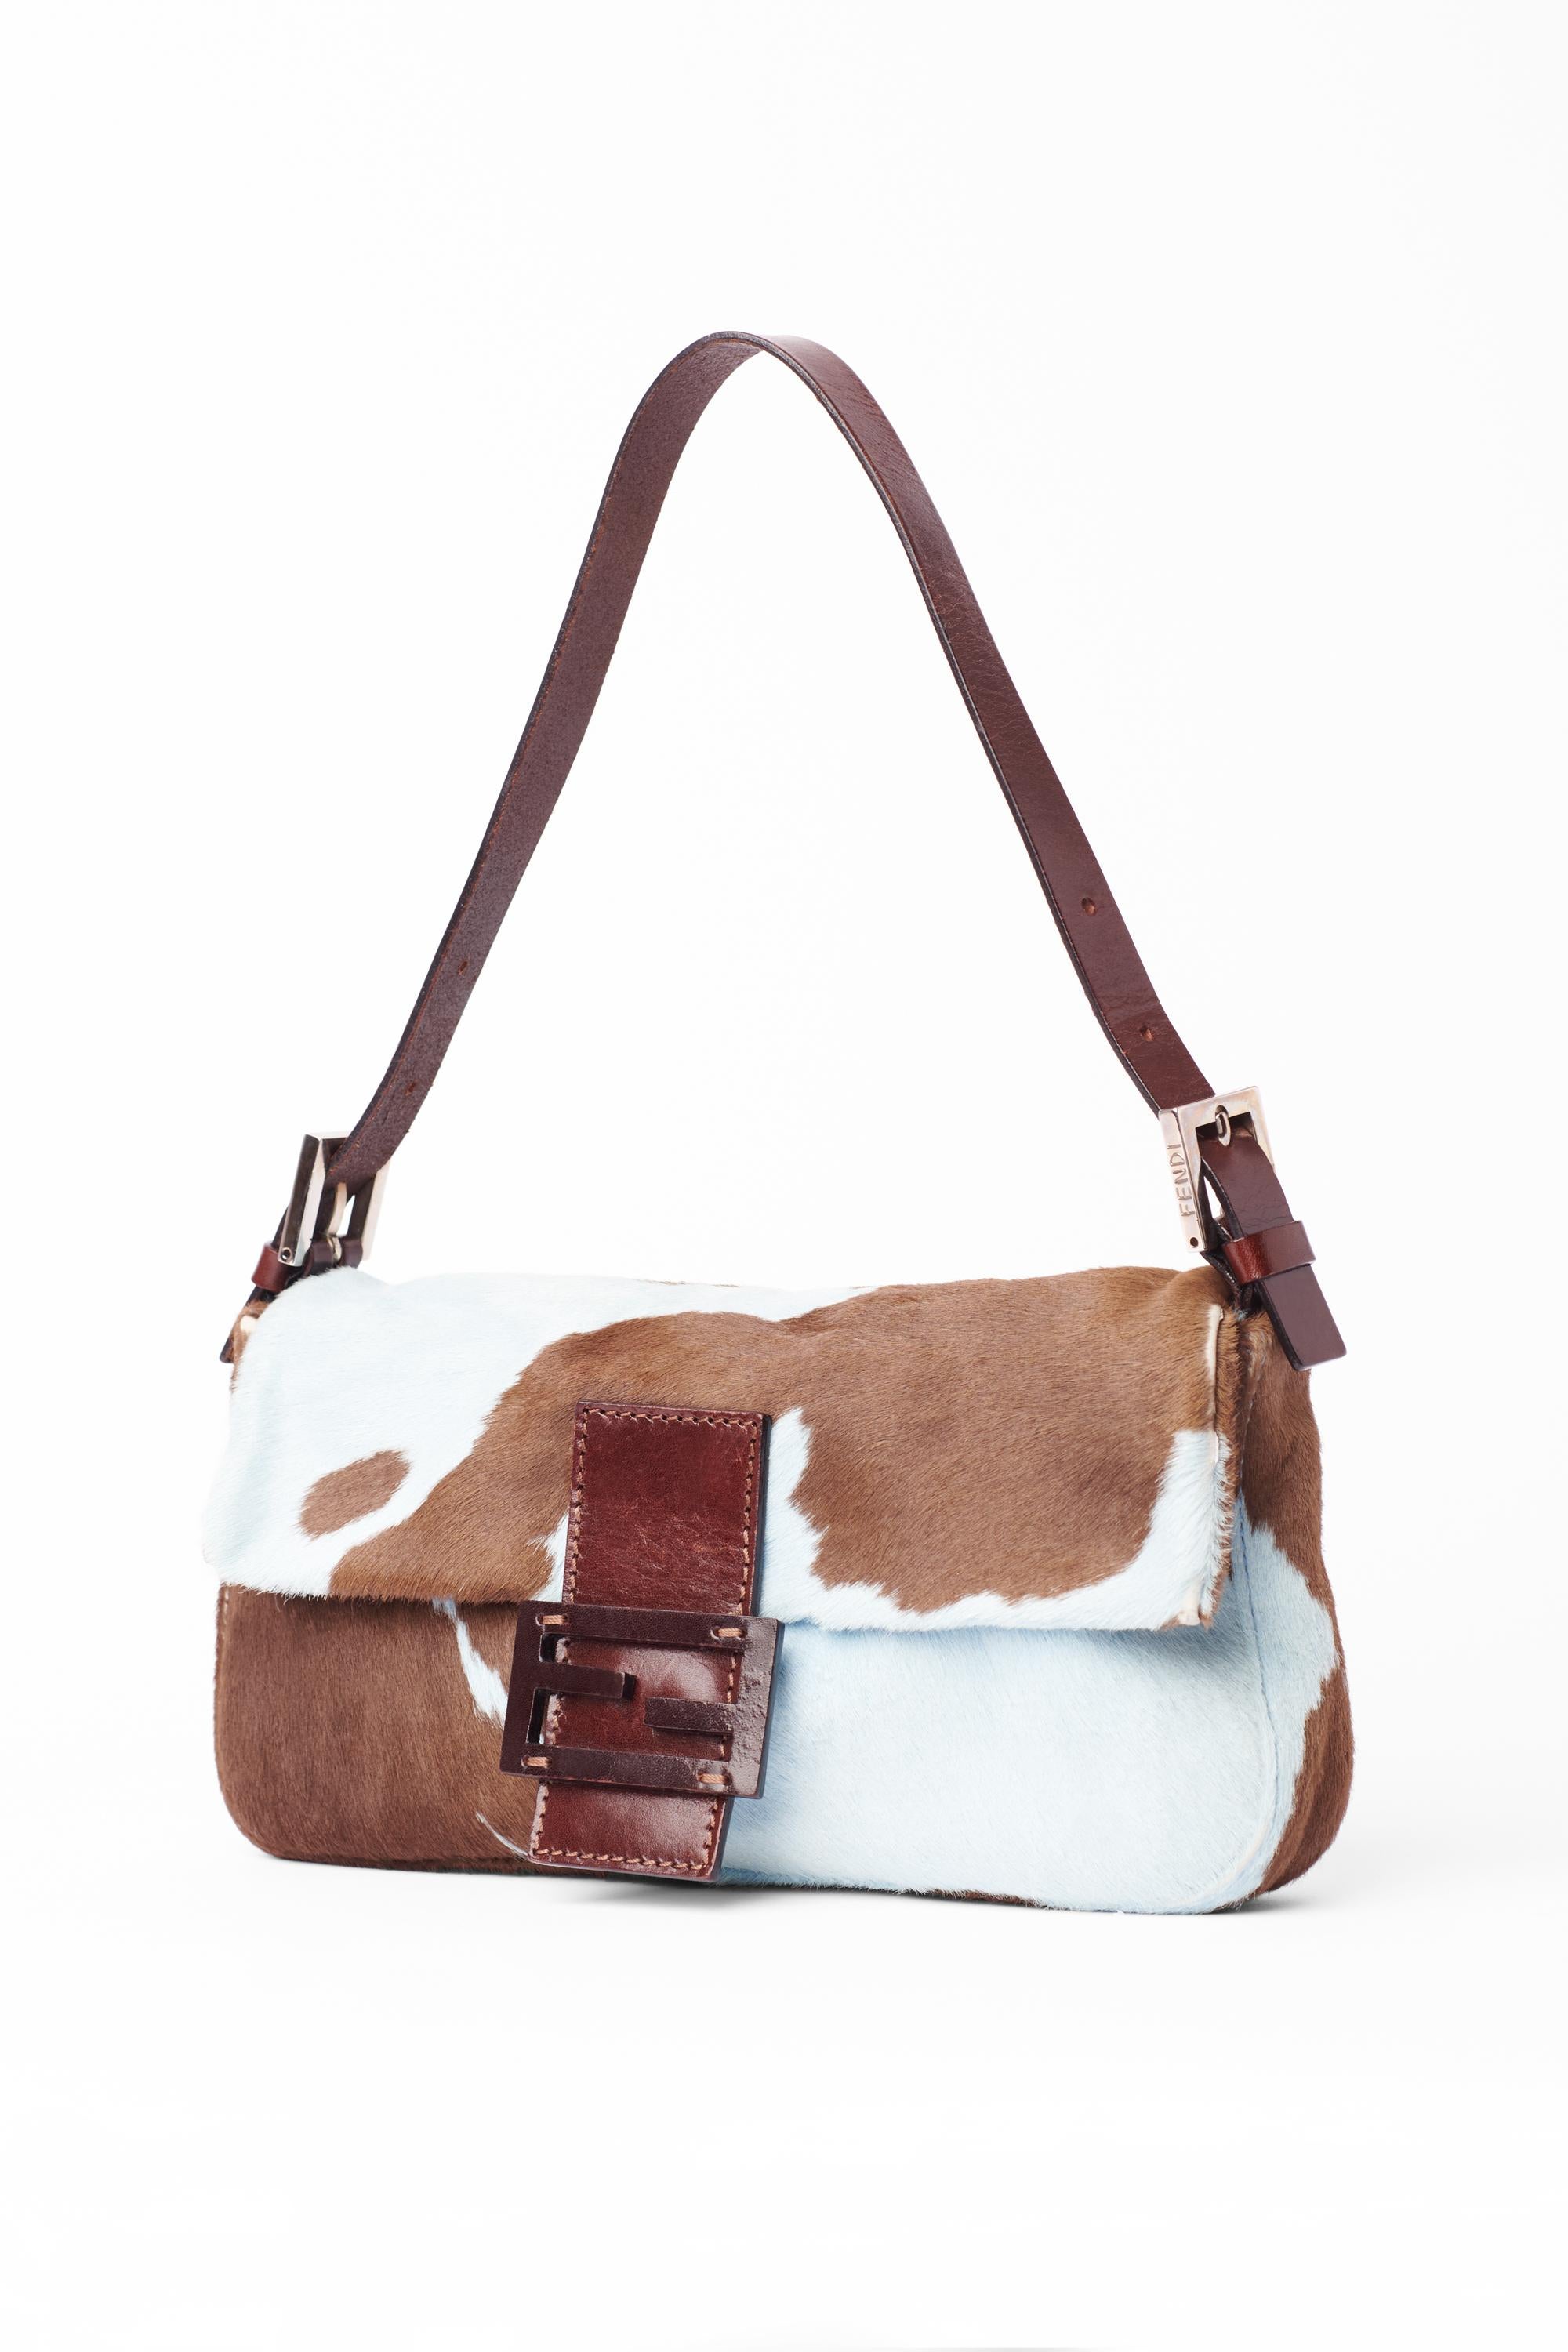 Vintage Fendi late 1990’s pony hair baguette. Features the rare blue and brown cow print allover in pony hair, adjustable leather strap with Fendi branded hardware buckles, iconic Fendi leather and metal front flap with magnetic closure and inner